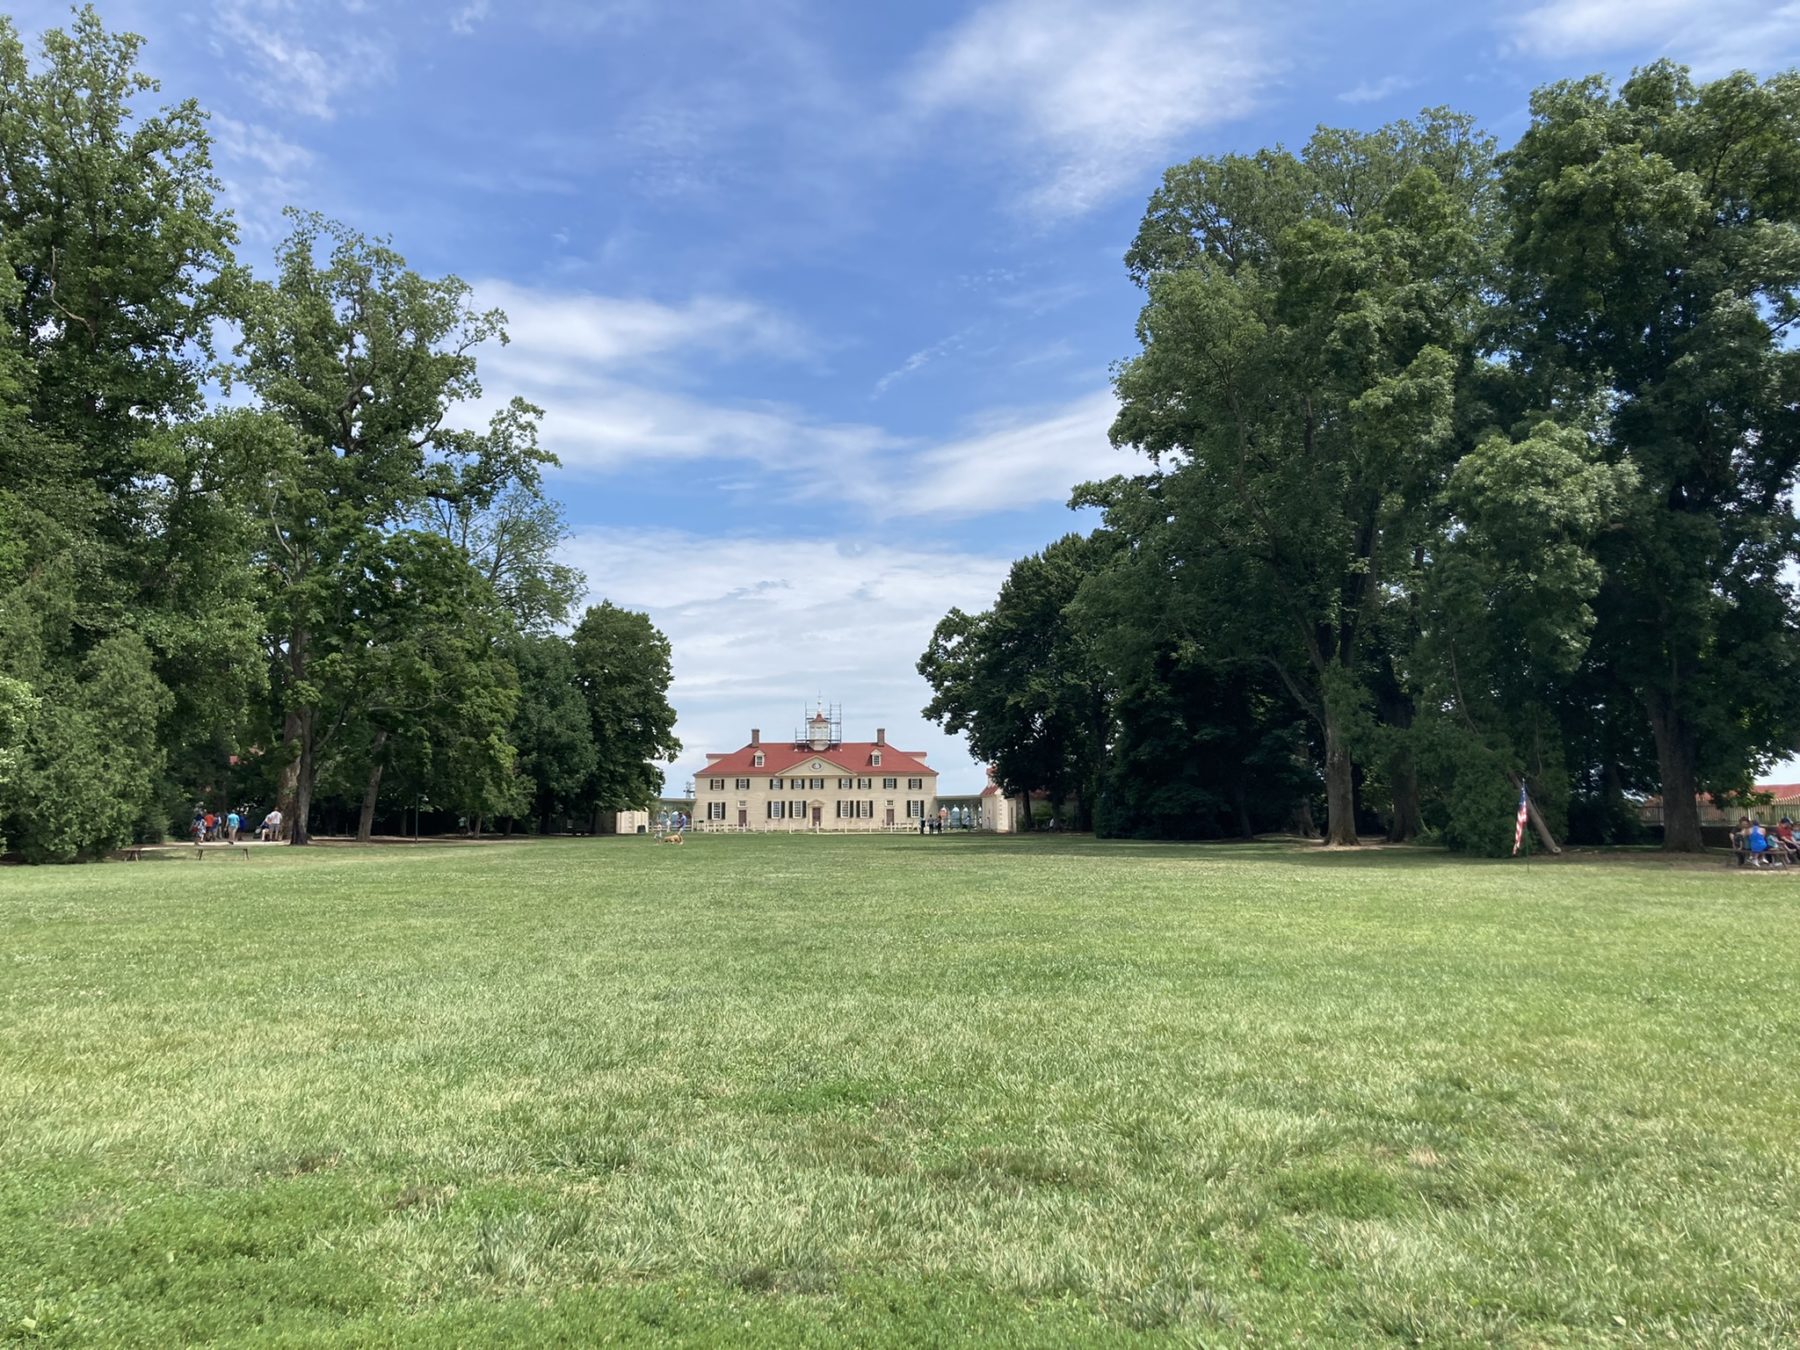 Best Museums for kids in DC - Mount Vernon